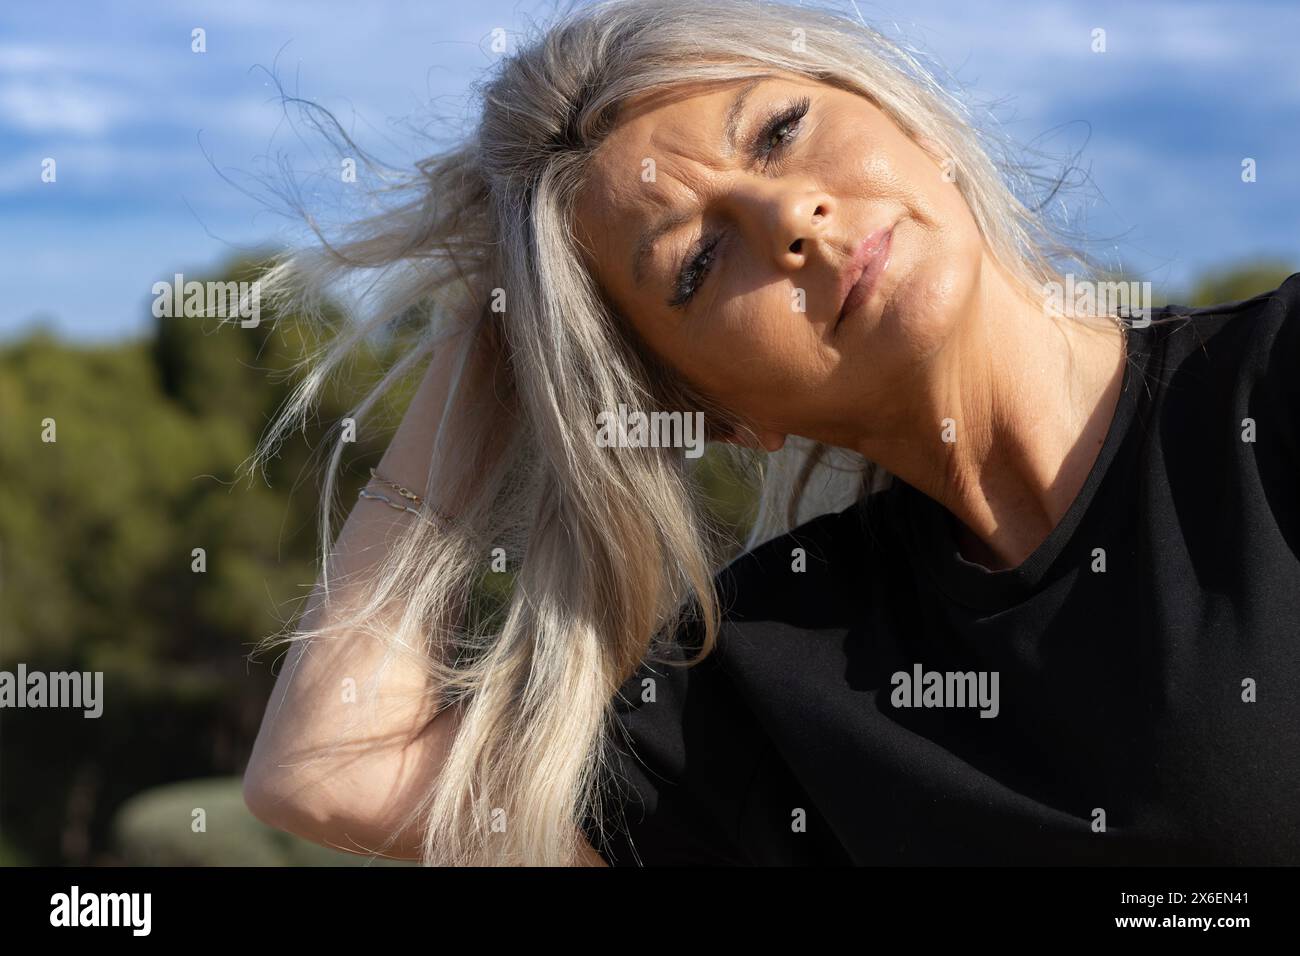 This portrait captures the essence of serene elegance as a woman stands enveloped in the soft embrace of nature’s light. Stock Photo